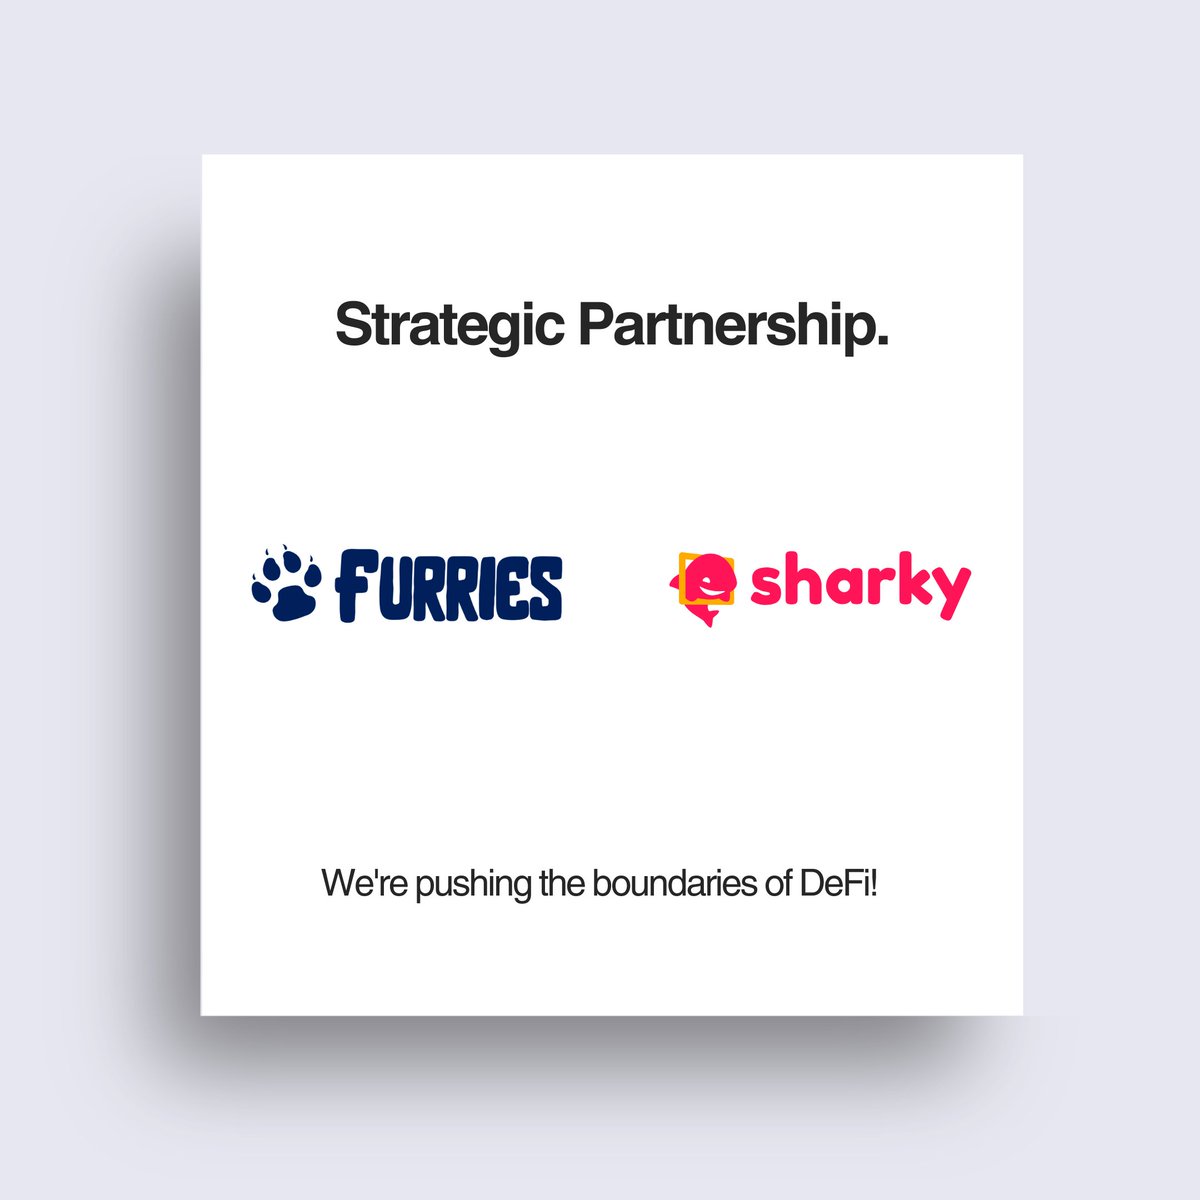 In our quest for growth & excellence, we've joined forces with @SharkyFi - a pioneer in borrowing & lending platforms. This strategic partnership marks a new chapter for us to exceed expectations & offer unparalleled services in our Defi & DEX platform.